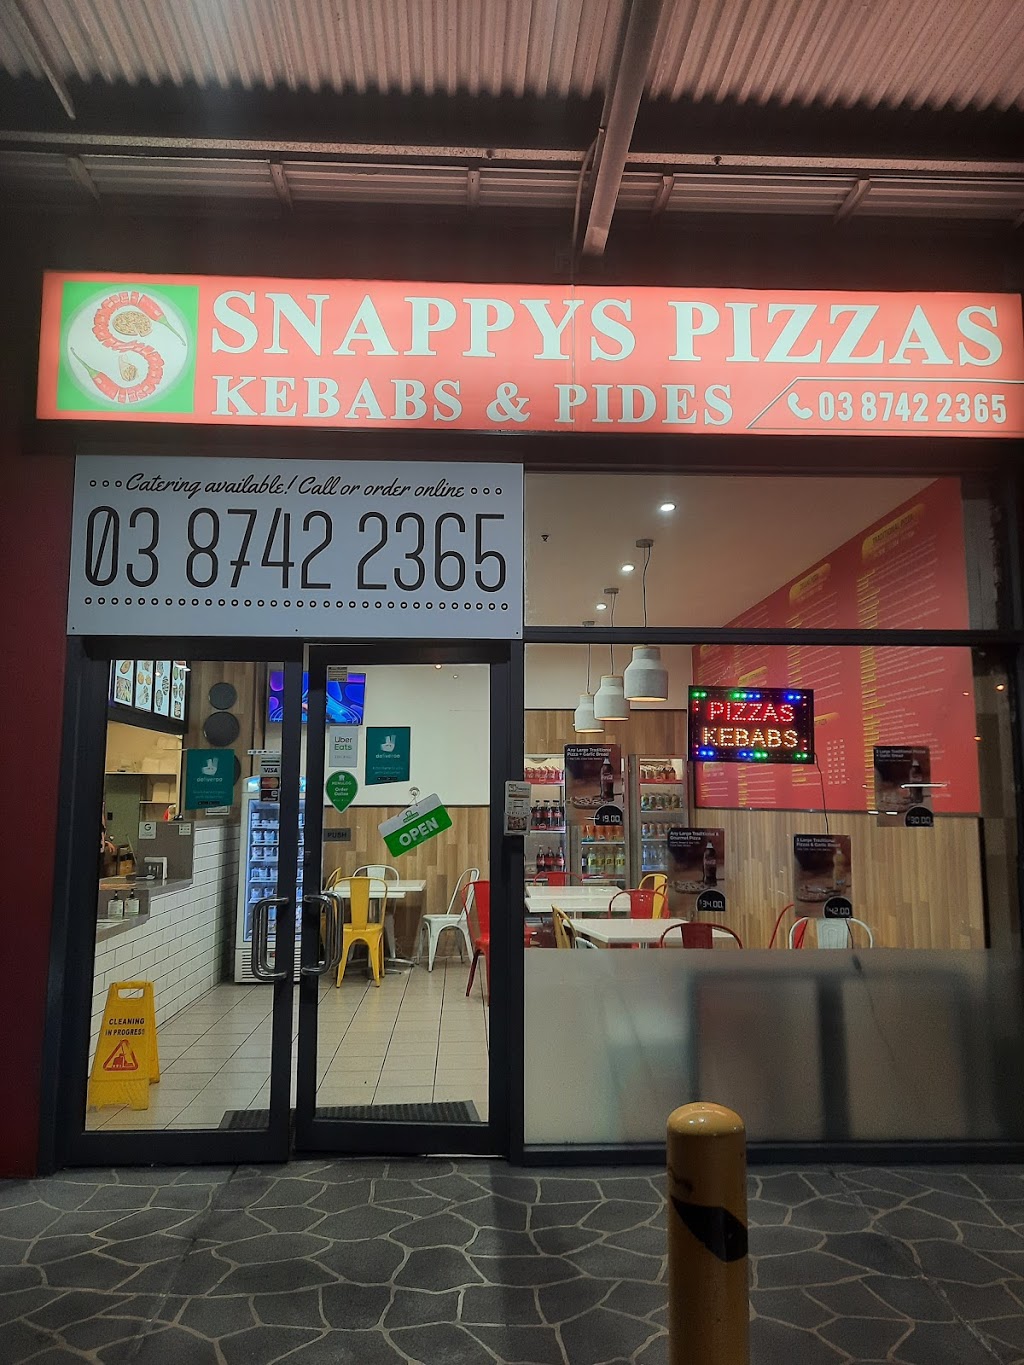 Snappys Pizza and Kebab Tarneit | meal takeaway | 26/380-382 Sayers Rd, Tarneit VIC 3029, Australia | 0387422365 OR +61 3 8742 2365